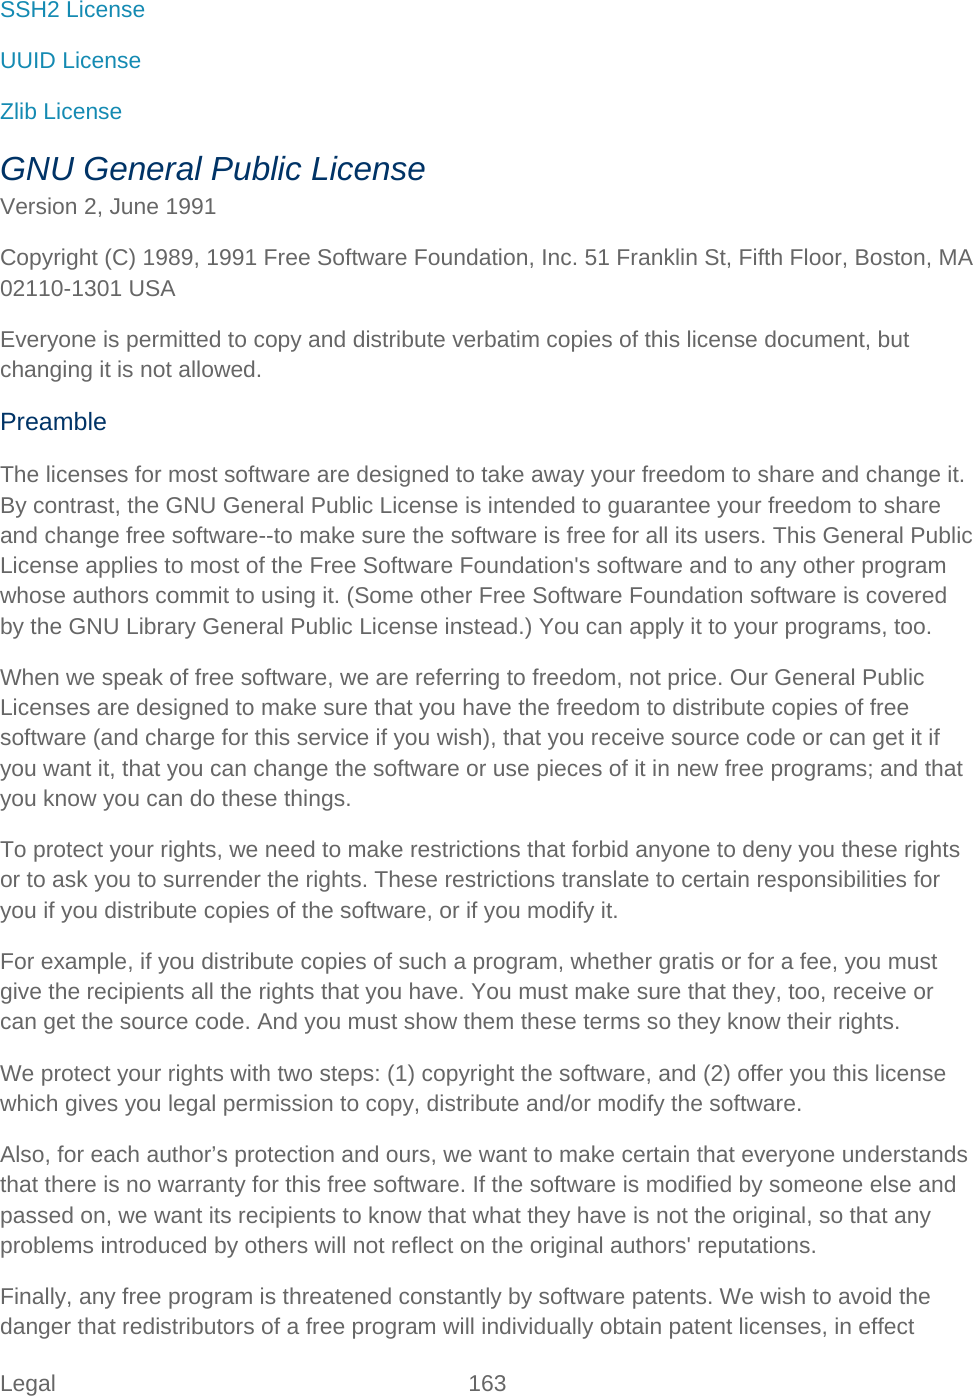 Legal 163   SSH2 License UUID License Zlib License GNU General Public License Version 2, June 1991 Copyright (C) 1989, 1991 Free Software Foundation, Inc. 51 Franklin St, Fifth Floor, Boston, MA 02110-1301 USA Everyone is permitted to copy and distribute verbatim copies of this license document, but changing it is not allowed.  Preamble The licenses for most software are designed to take away your freedom to share and change it. By contrast, the GNU General Public License is intended to guarantee your freedom to share and change free software--to make sure the software is free for all its users. This General Public License applies to most of the Free Software Foundation&apos;s software and to any other program whose authors commit to using it. (Some other Free Software Foundation software is covered by the GNU Library General Public License instead.) You can apply it to your programs, too.  When we speak of free software, we are referring to freedom, not price. Our General Public Licenses are designed to make sure that you have the freedom to distribute copies of free software (and charge for this service if you wish), that you receive source code or can get it if you want it, that you can change the software or use pieces of it in new free programs; and that you know you can do these things. To protect your rights, we need to make restrictions that forbid anyone to deny you these rights or to ask you to surrender the rights. These restrictions translate to certain responsibilities for you if you distribute copies of the software, or if you modify it.  For example, if you distribute copies of such a program, whether gratis or for a fee, you must give the recipients all the rights that you have. You must make sure that they, too, receive or can get the source code. And you must show them these terms so they know their rights.  We protect your rights with two steps: (1) copyright the software, and (2) offer you this license which gives you legal permission to copy, distribute and/or modify the software.  Also, for each author’s protection and ours, we want to make certain that everyone understands that there is no warranty for this free software. If the software is modified by someone else and passed on, we want its recipients to know that what they have is not the original, so that any problems introduced by others will not reflect on the original authors&apos; reputations.  Finally, any free program is threatened constantly by software patents. We wish to avoid the danger that redistributors of a free program will individually obtain patent licenses, in effect 